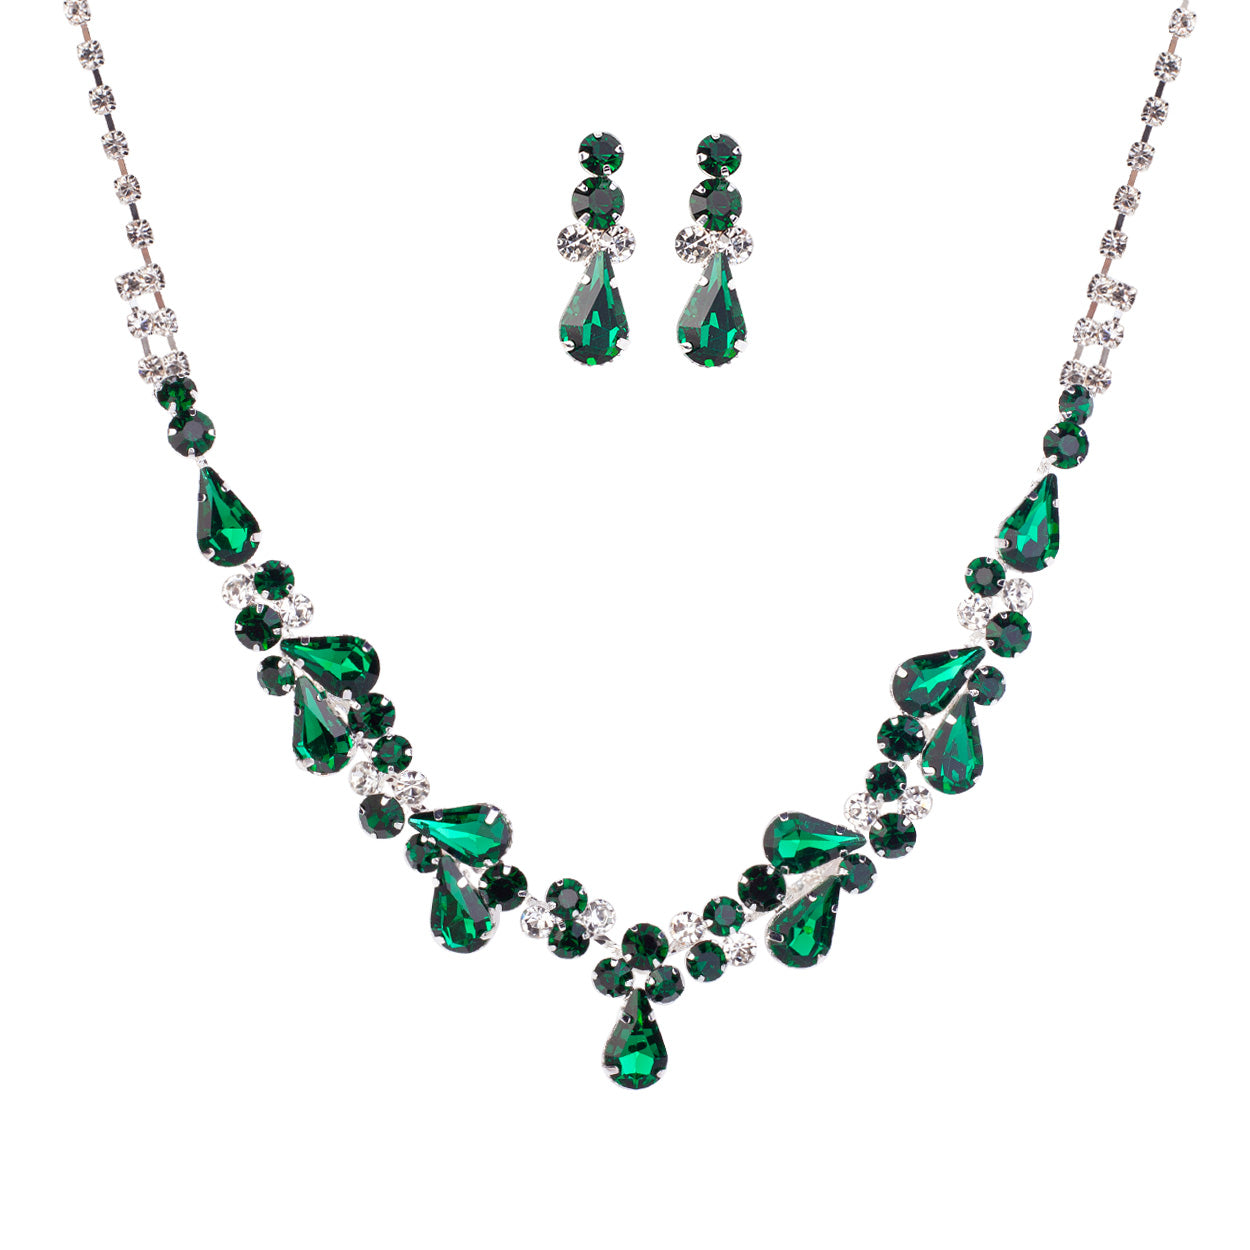 Just Shraddha presents Emerald stones multi string statement necklace  available only at Pernia's Pop Up Shop. 2024